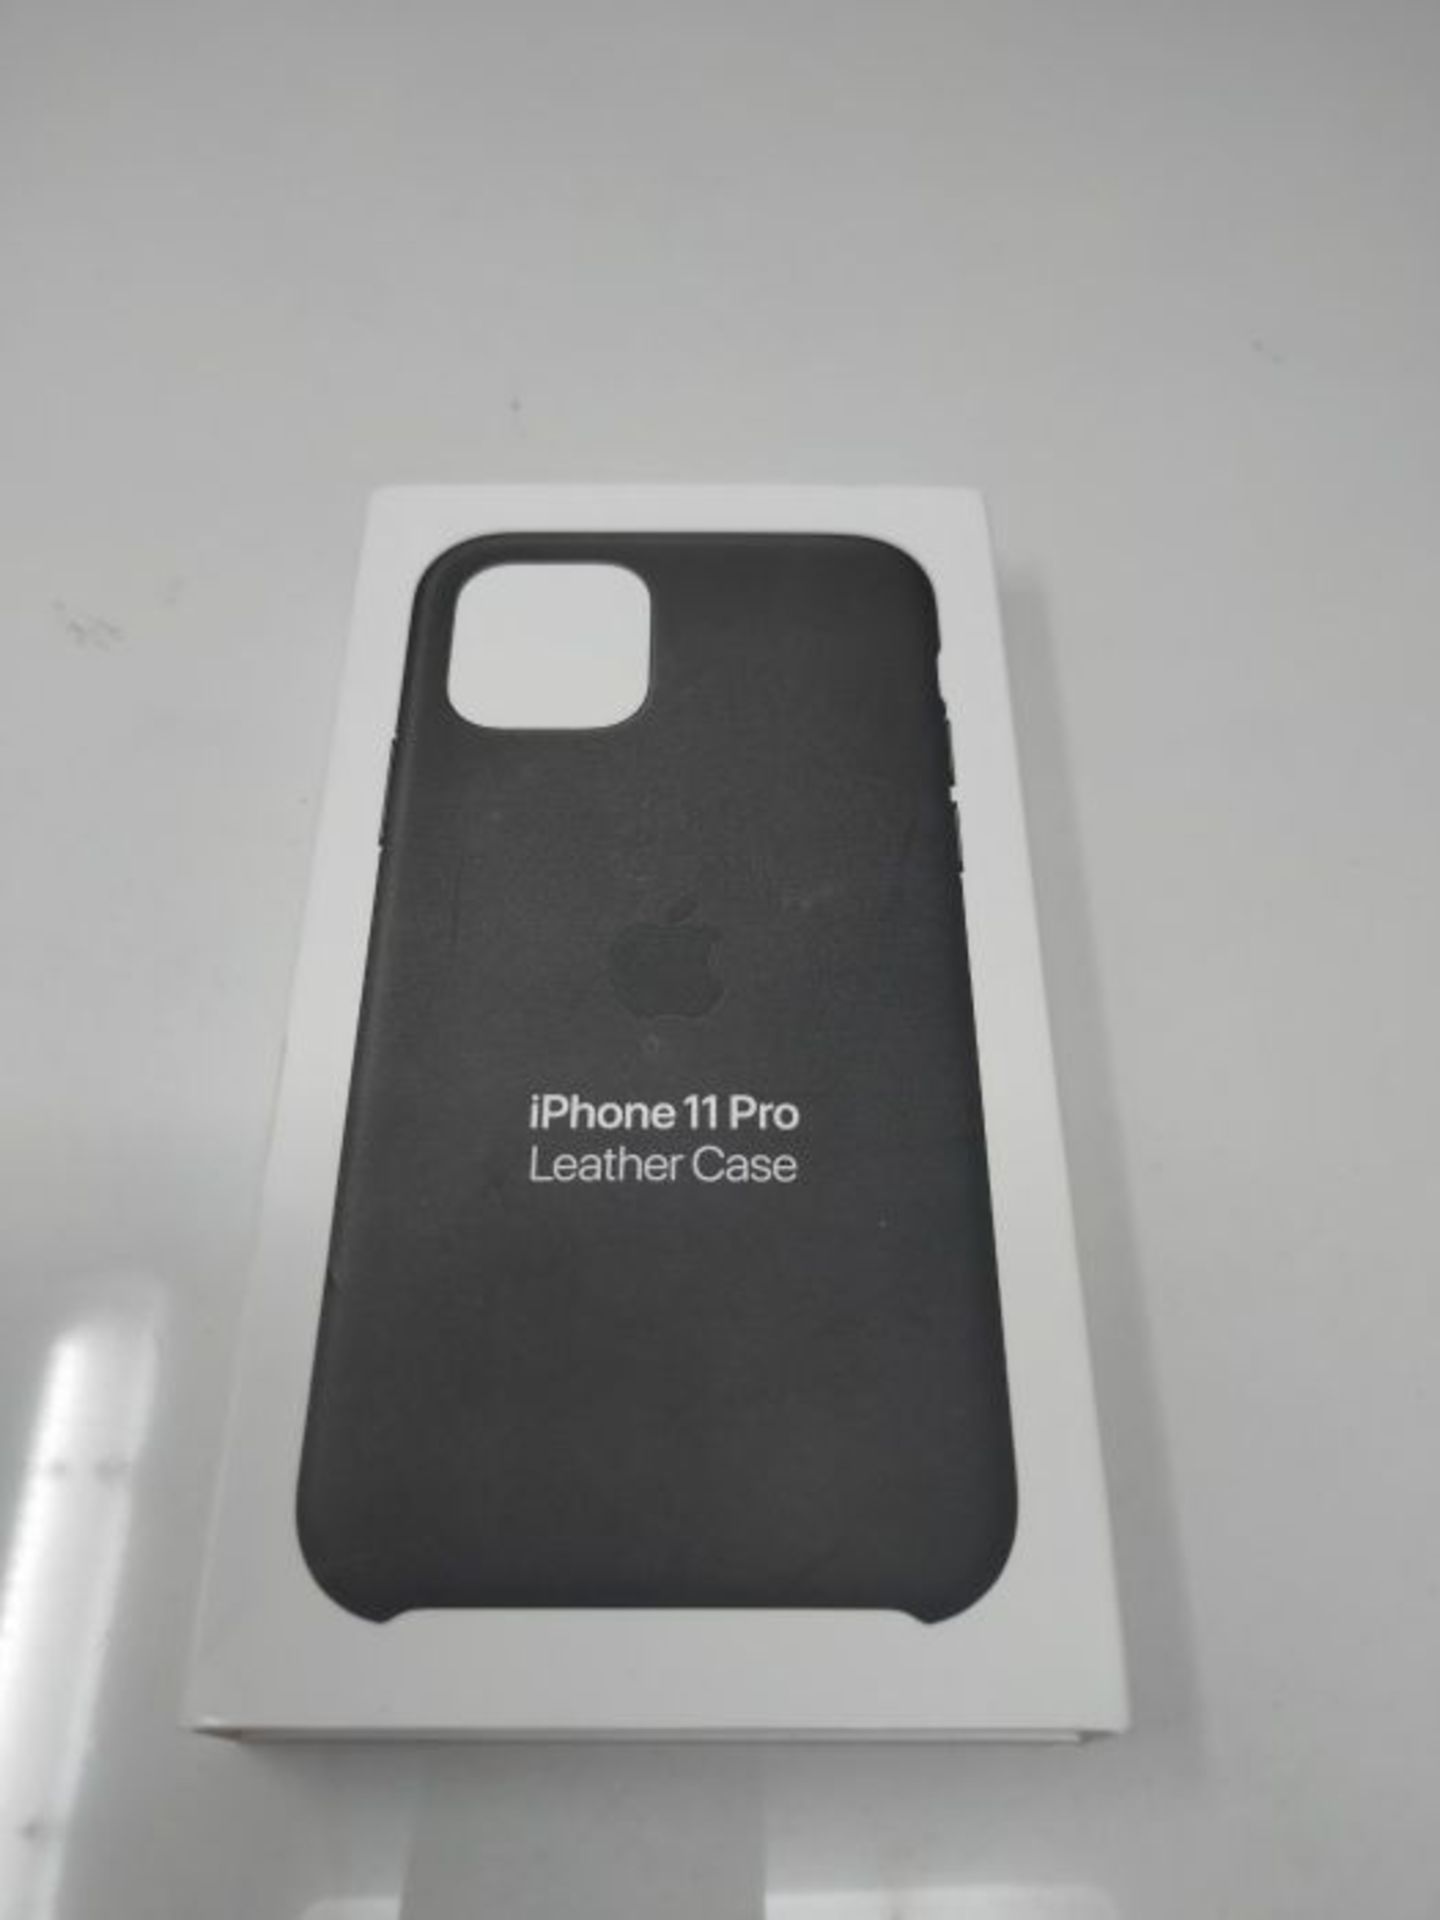 Apple Leather Case (for iPhone 11 Pro) - Black - Image 2 of 9